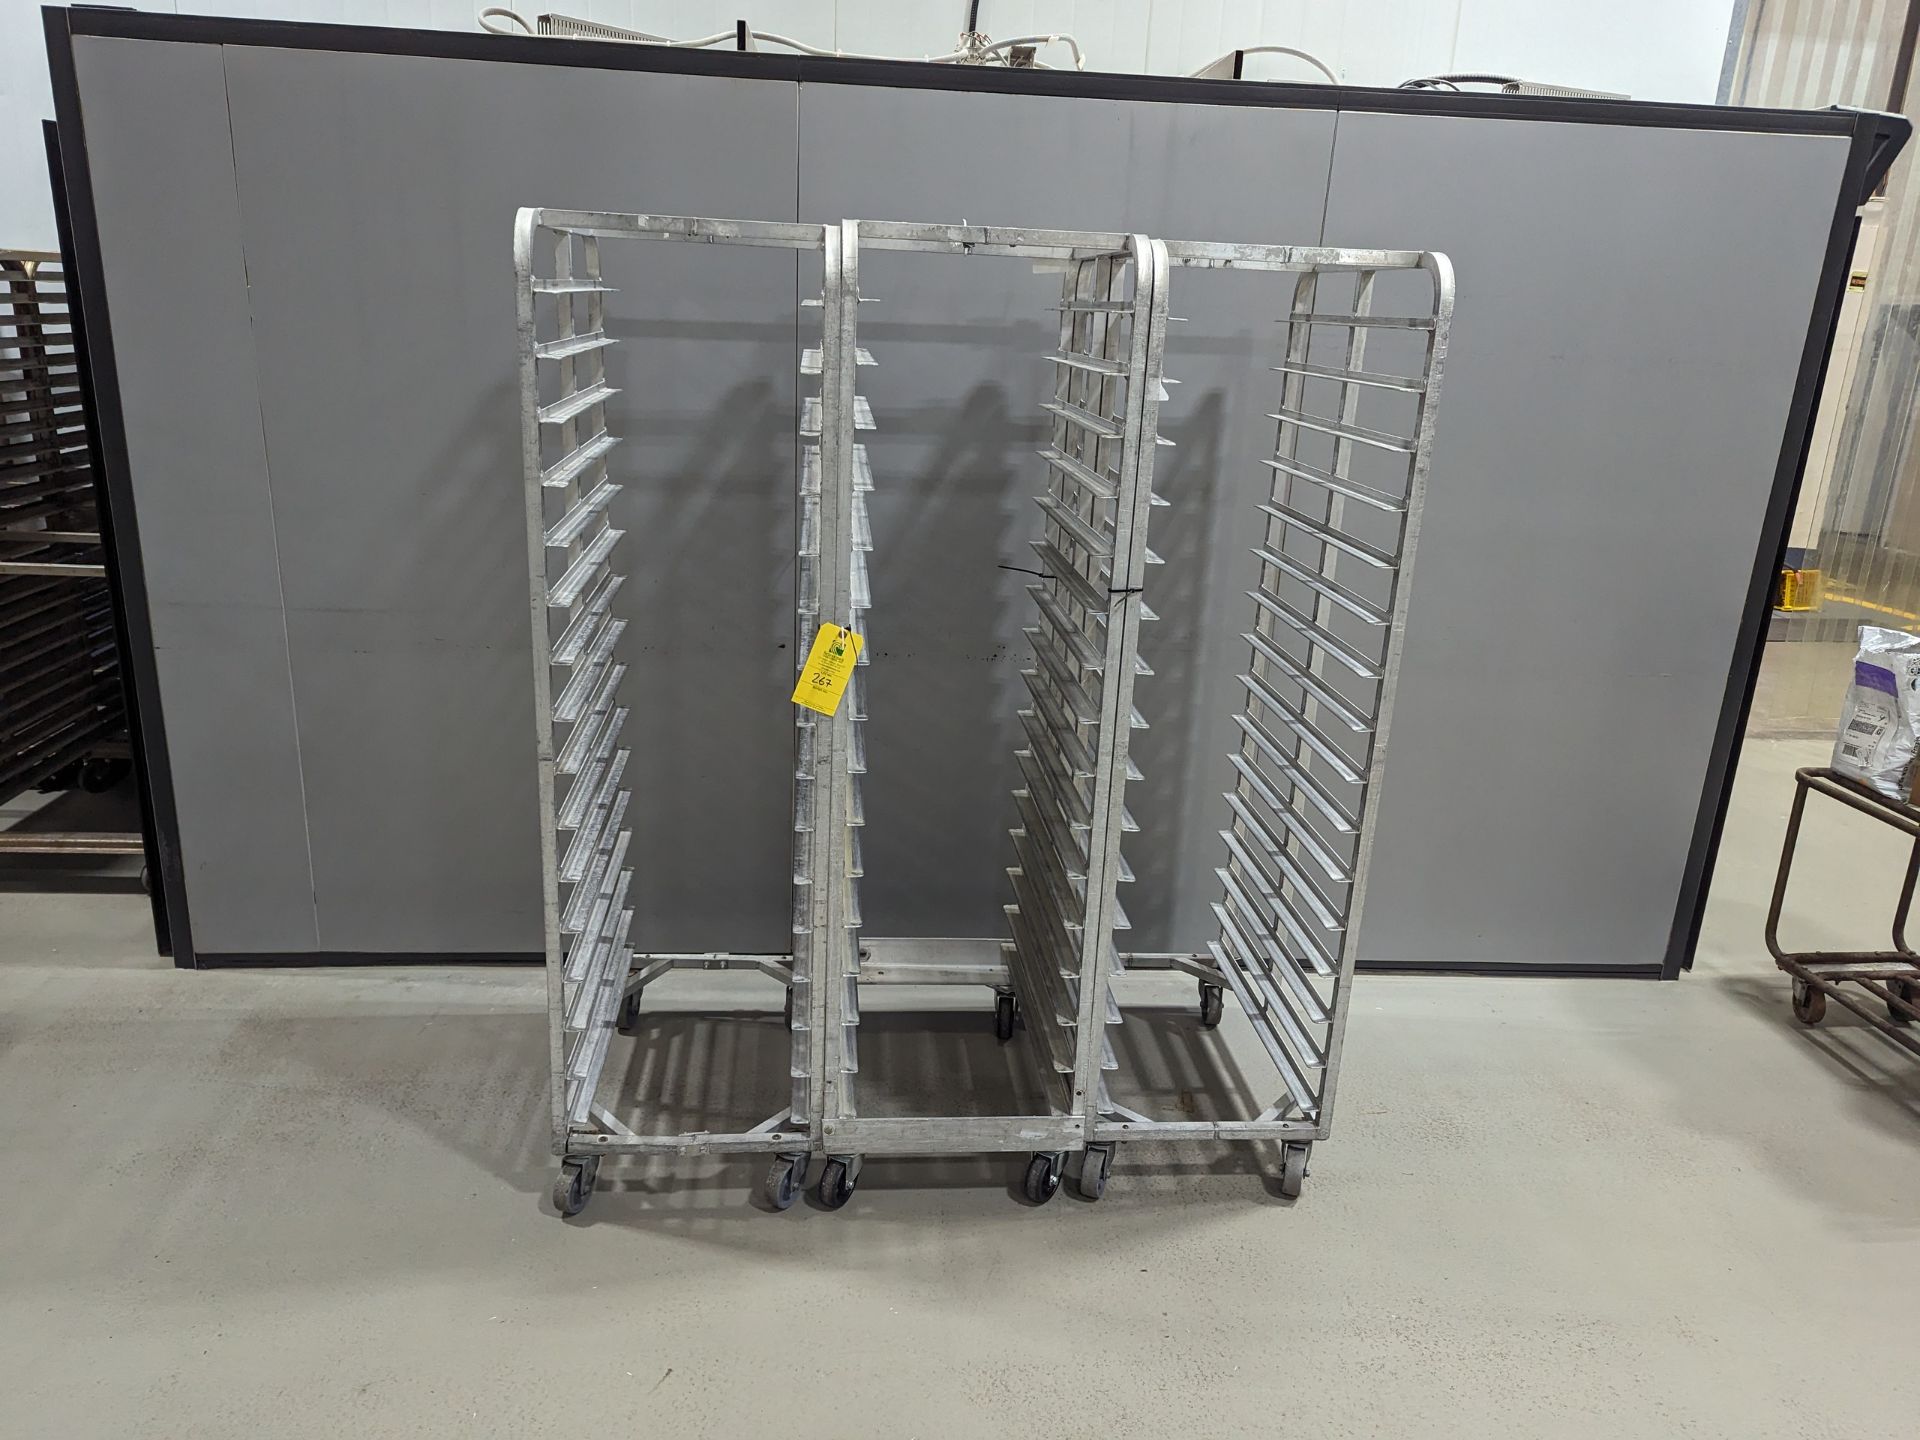 Lot of 3 Aluminum Racks, Dimensions LxWxH: 57x37x69 Measurements are for lot of 3 together